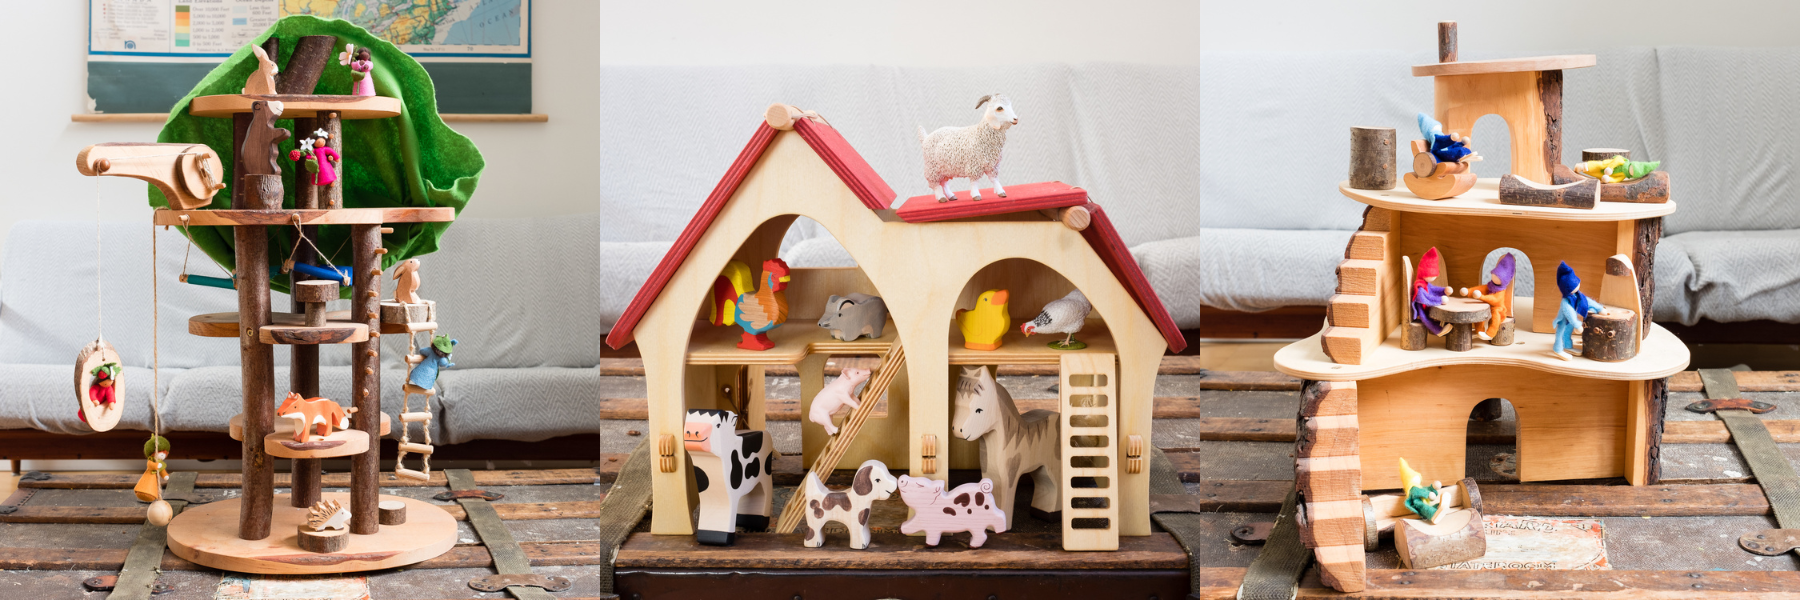 Dollhouses & Playscapes – Page 2 – Dilly Dally Kids